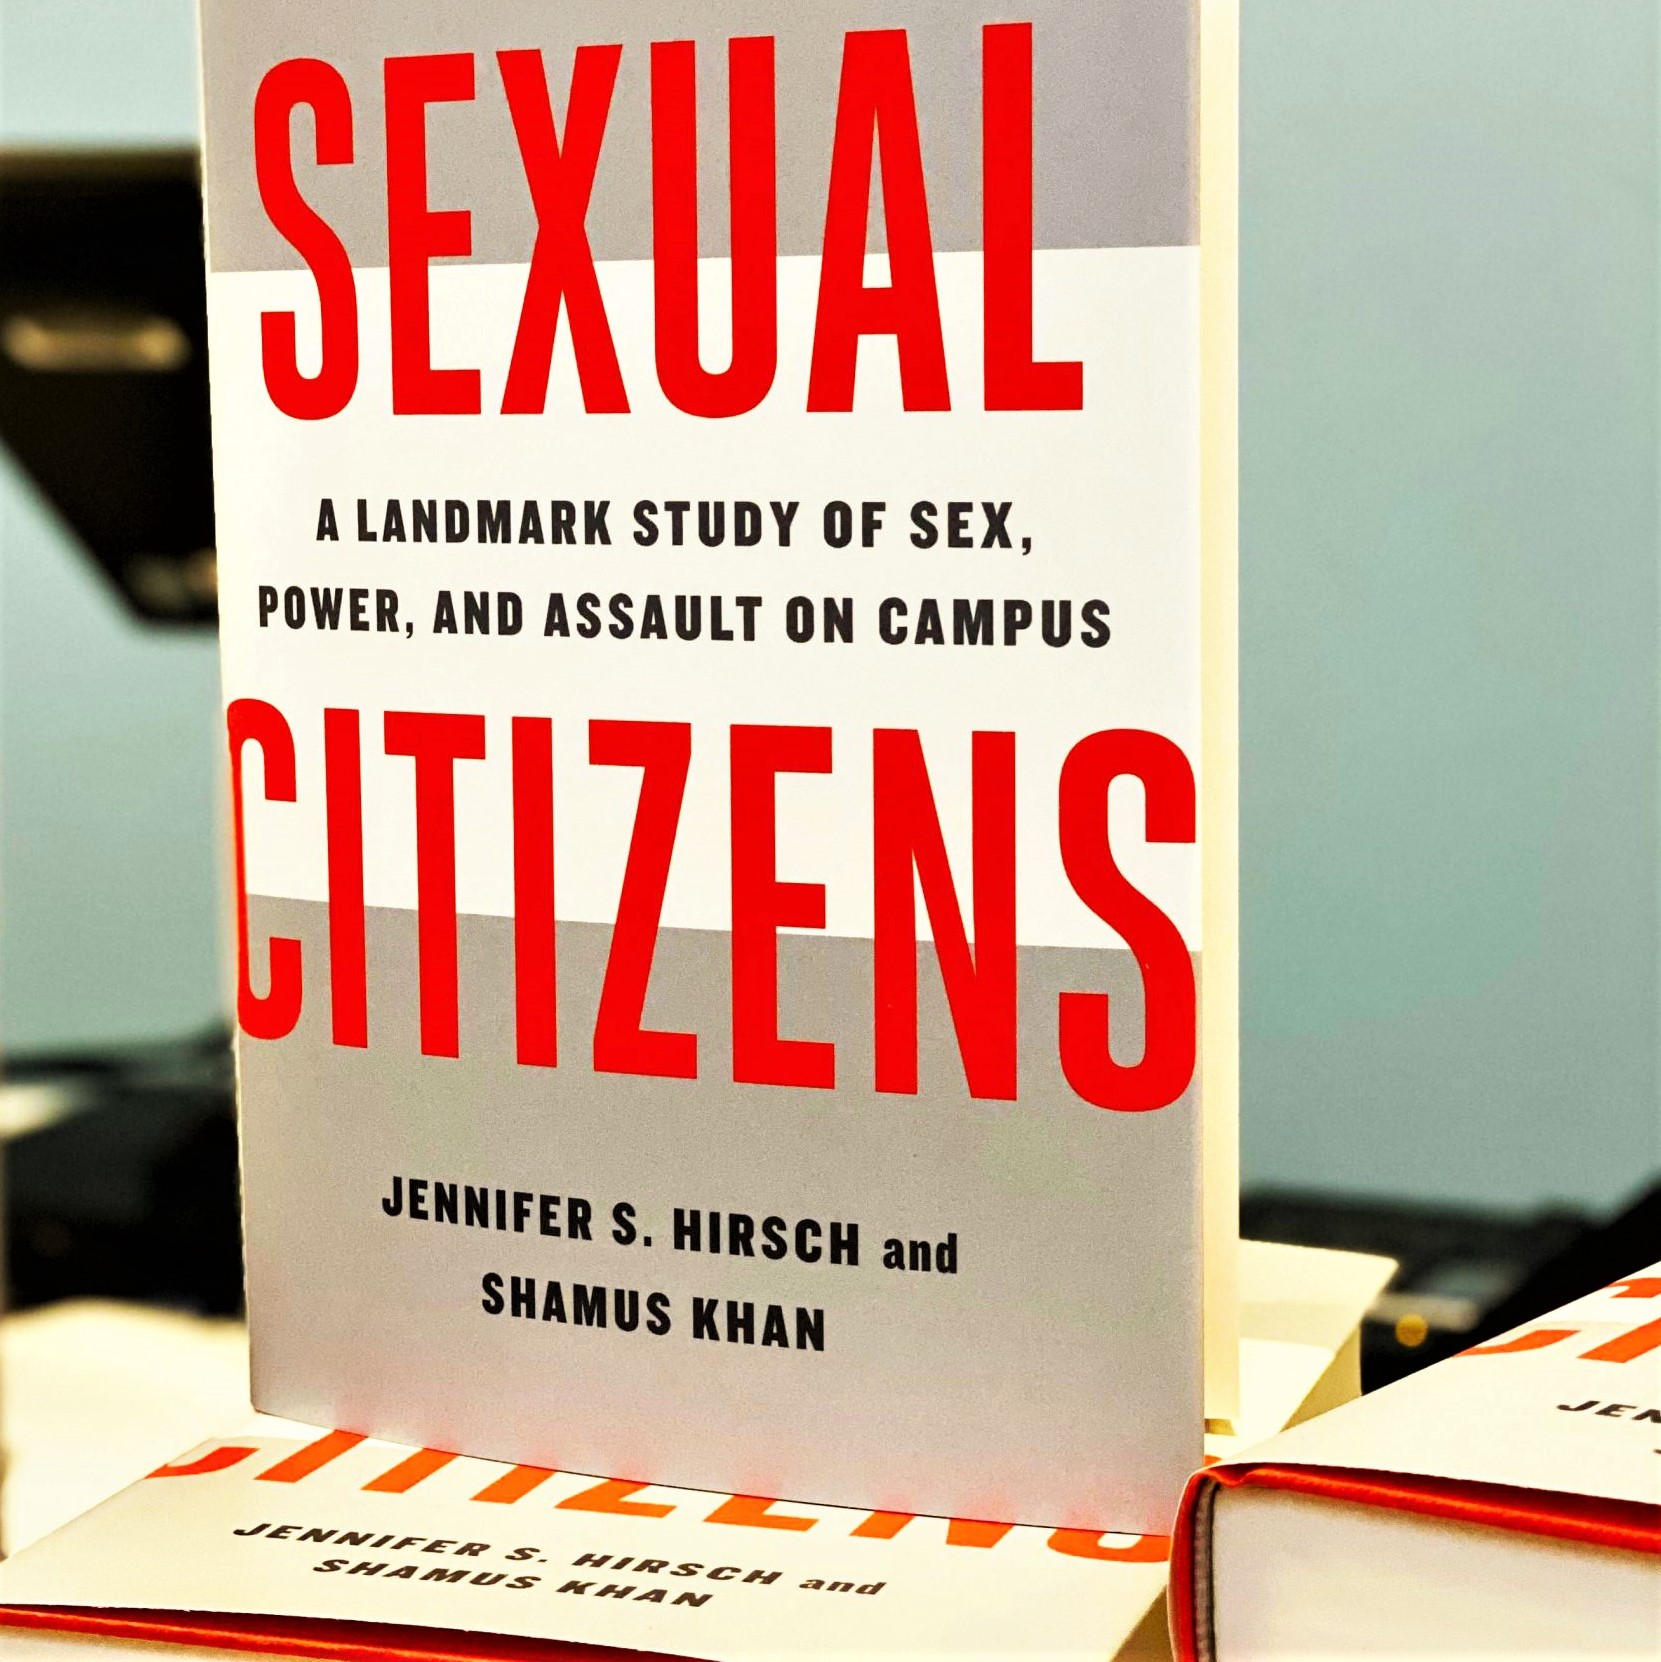 Cover image for the book 'Sexual Citizens: A Landmark Study of Sex, Power, and Assault on Campus'